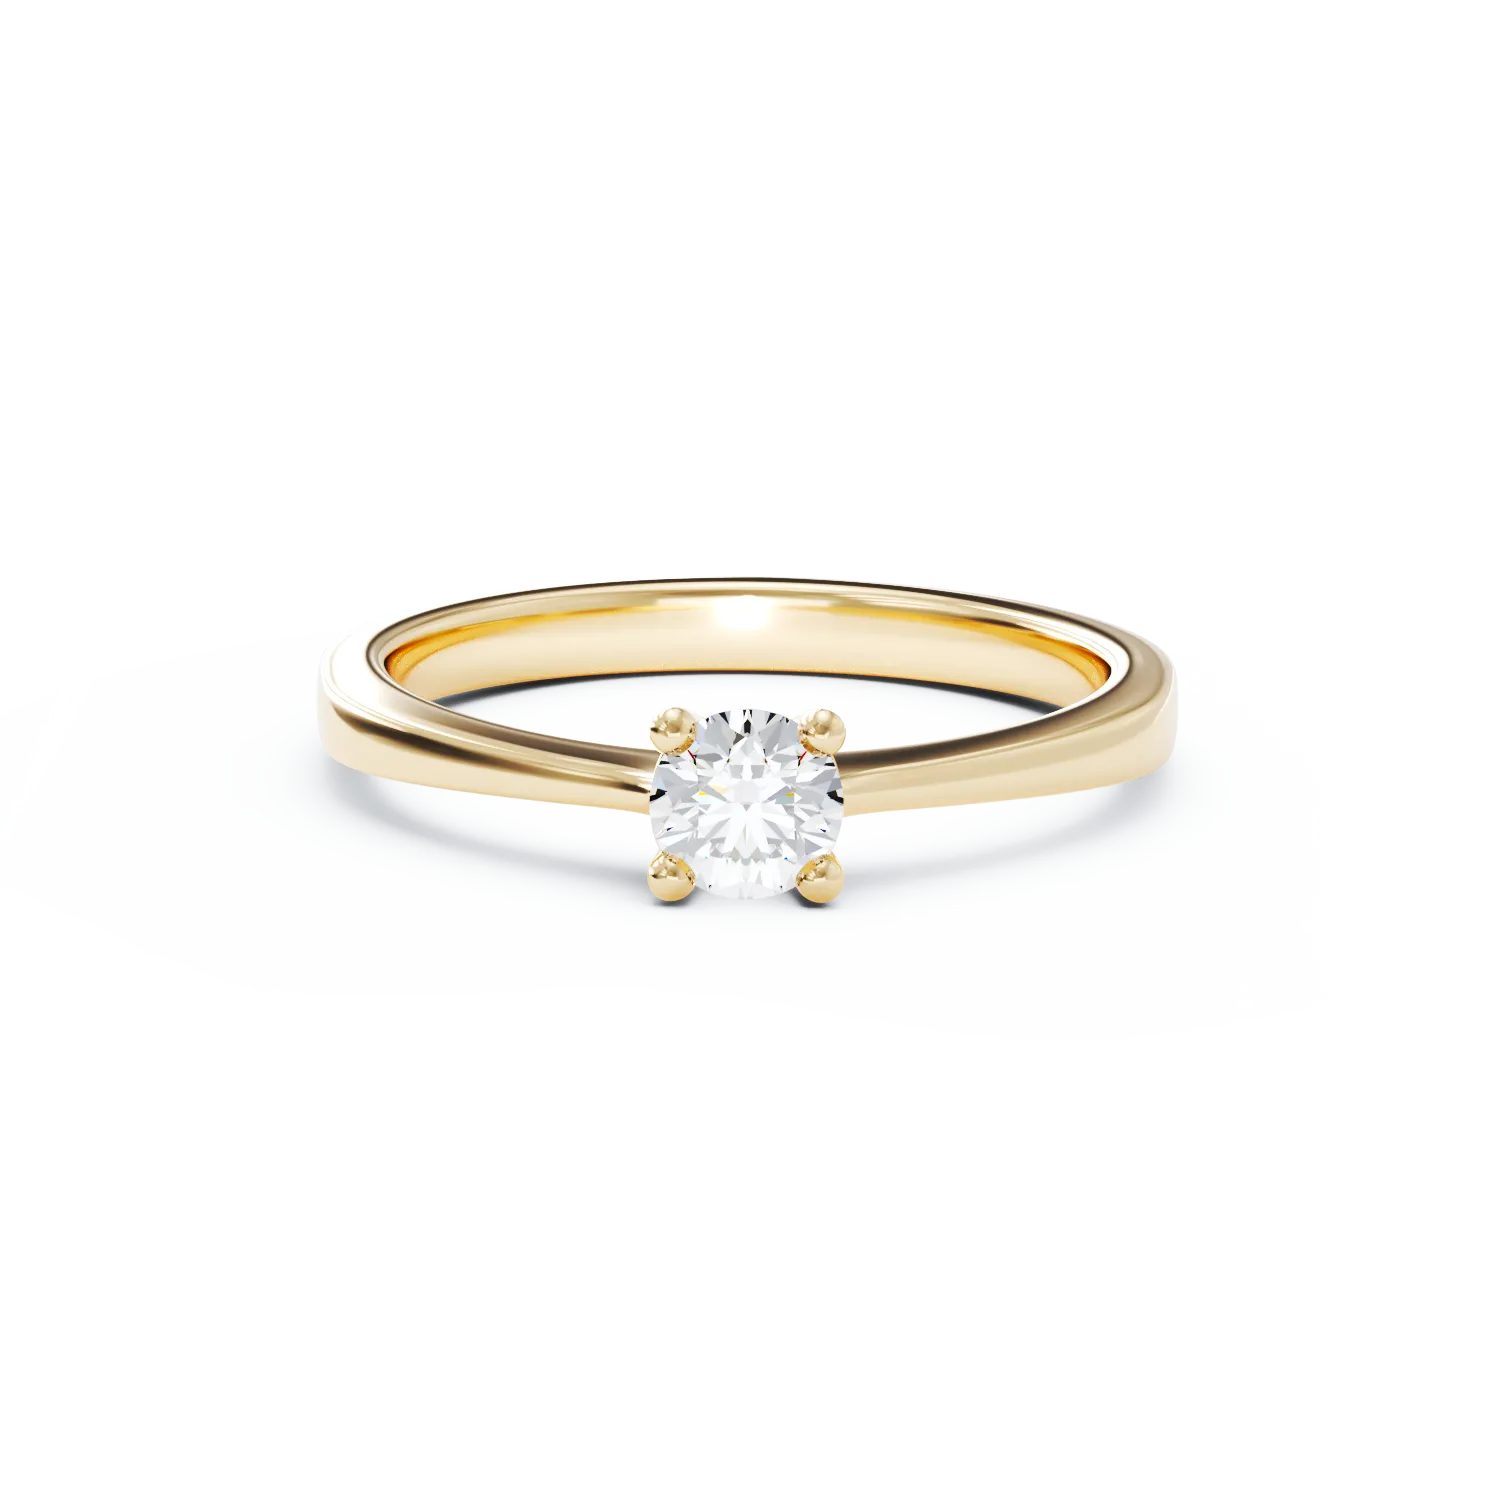 18K yellow gold engagement ring with 0.315ct diamond